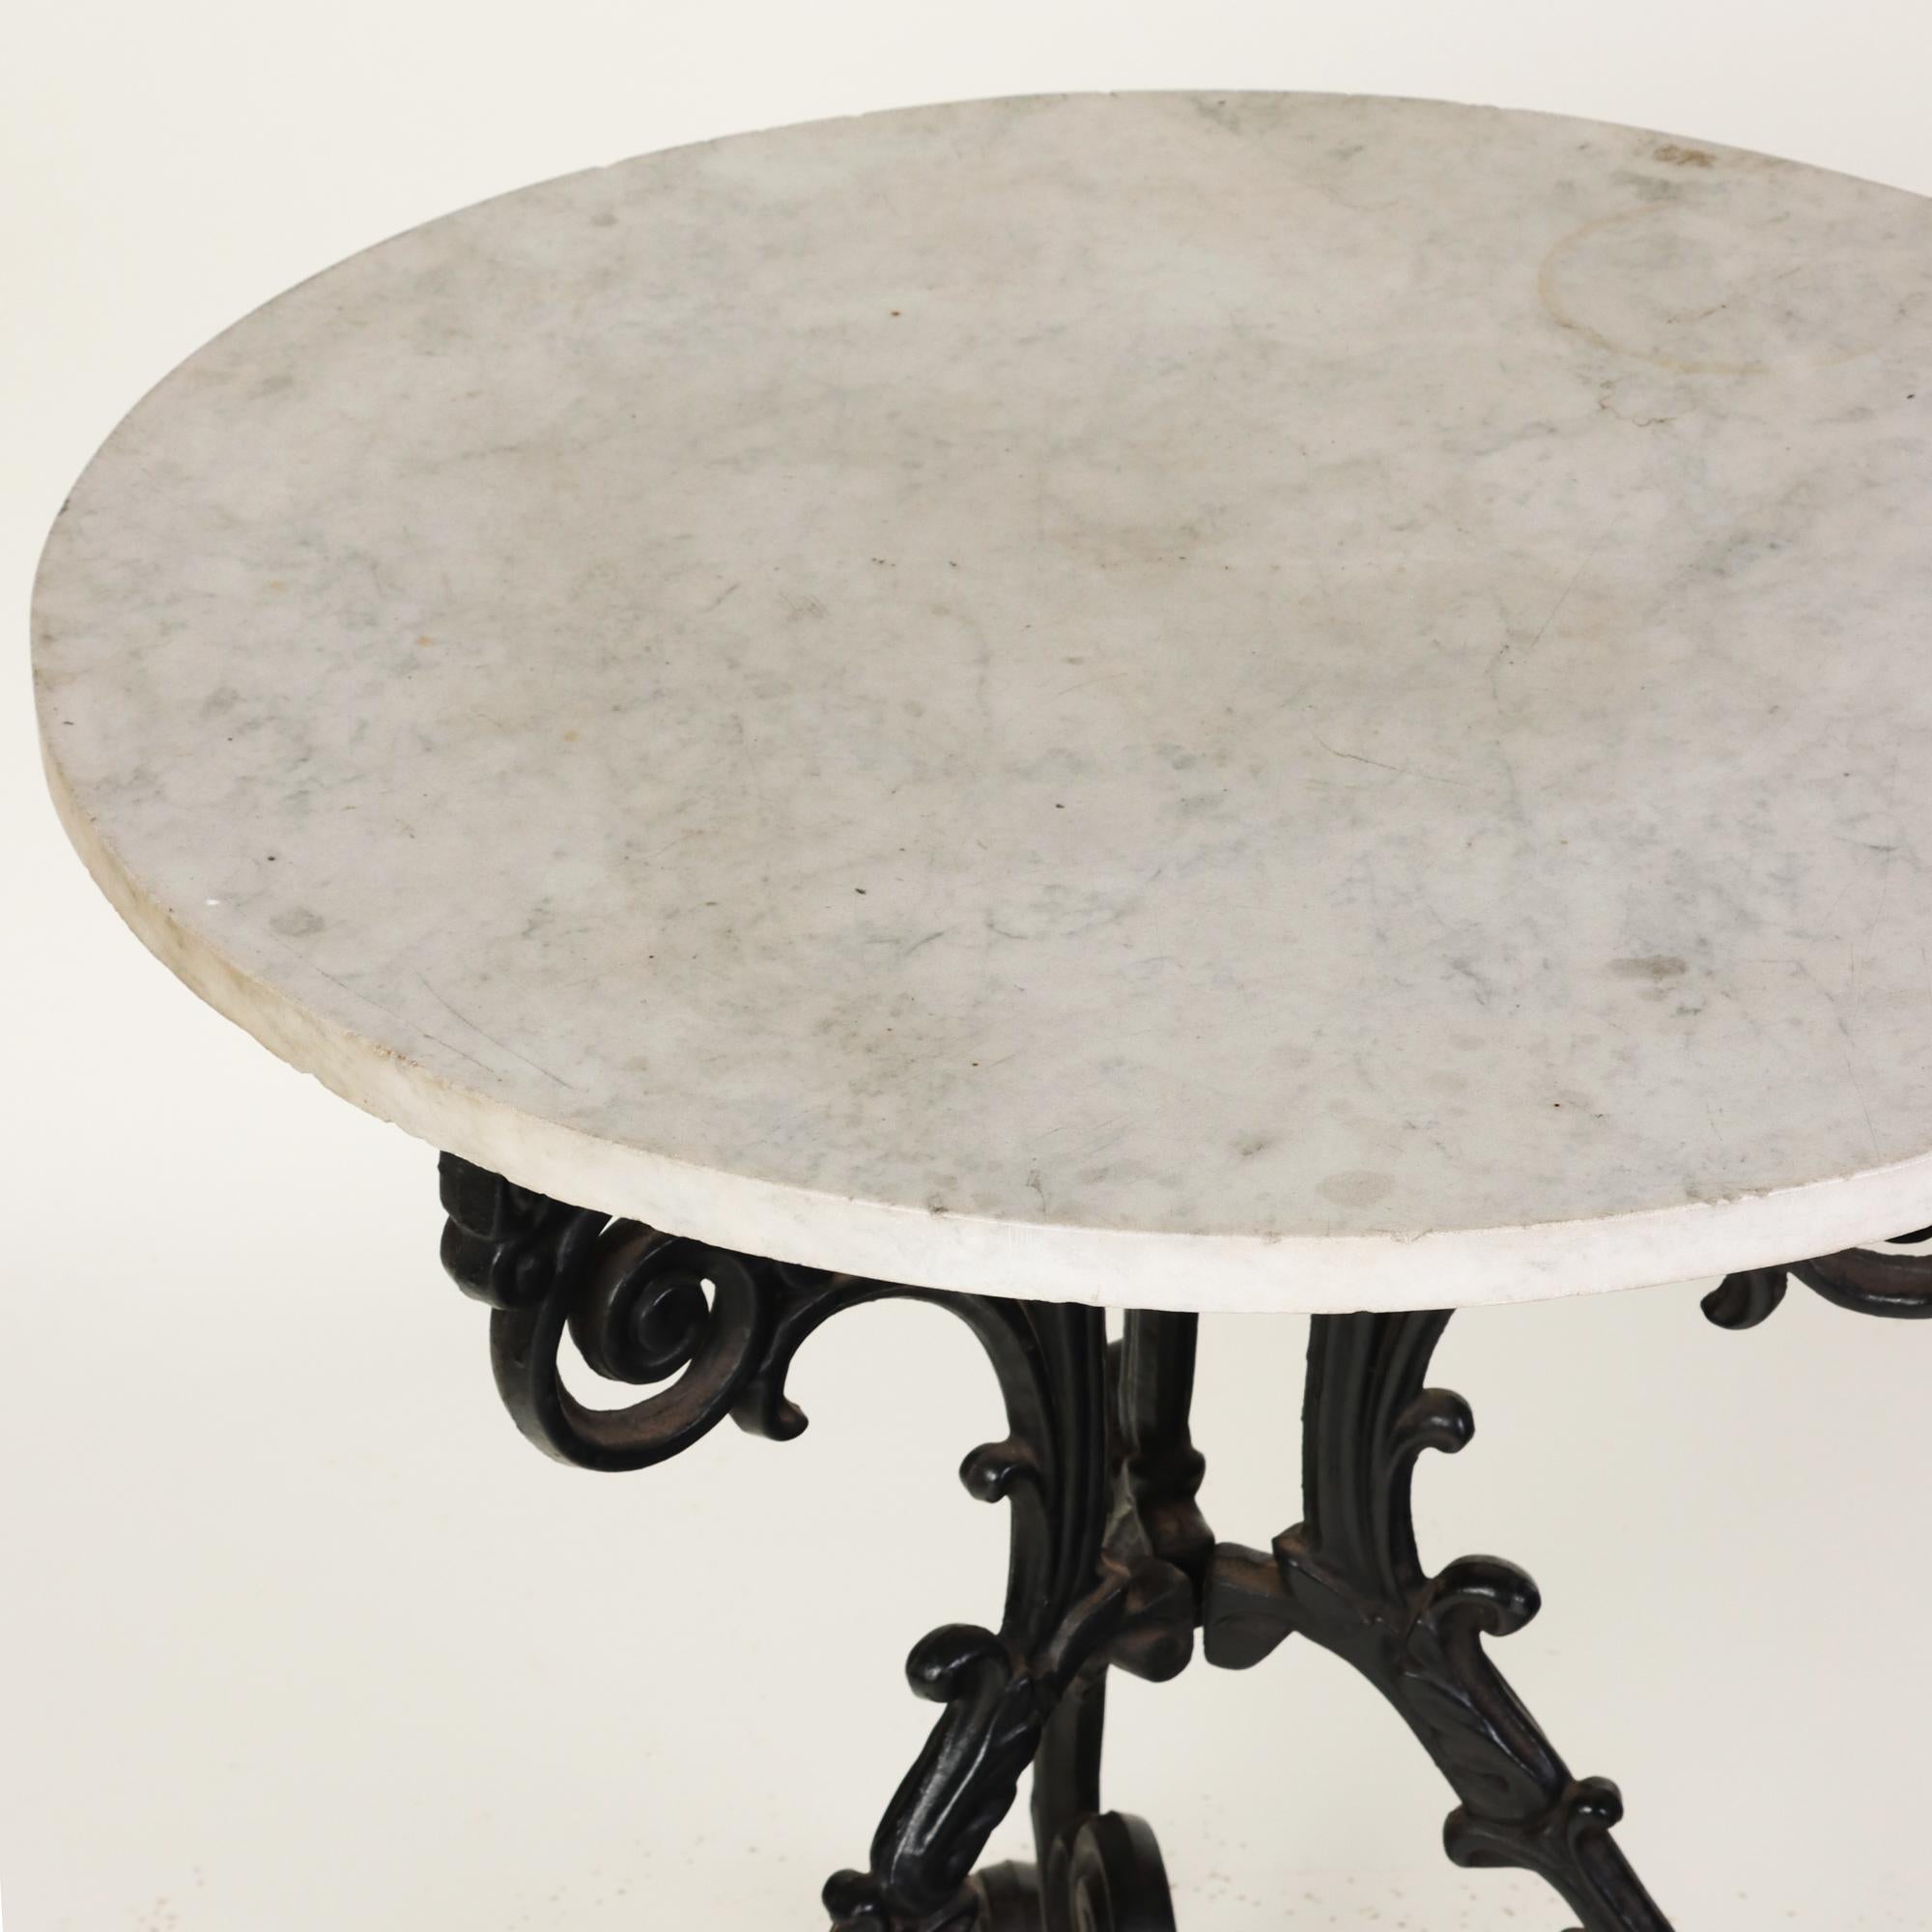 A French nineteenth century bistro table with white marble top resting on beautiful ornate cast iron tripodal pedestal base.